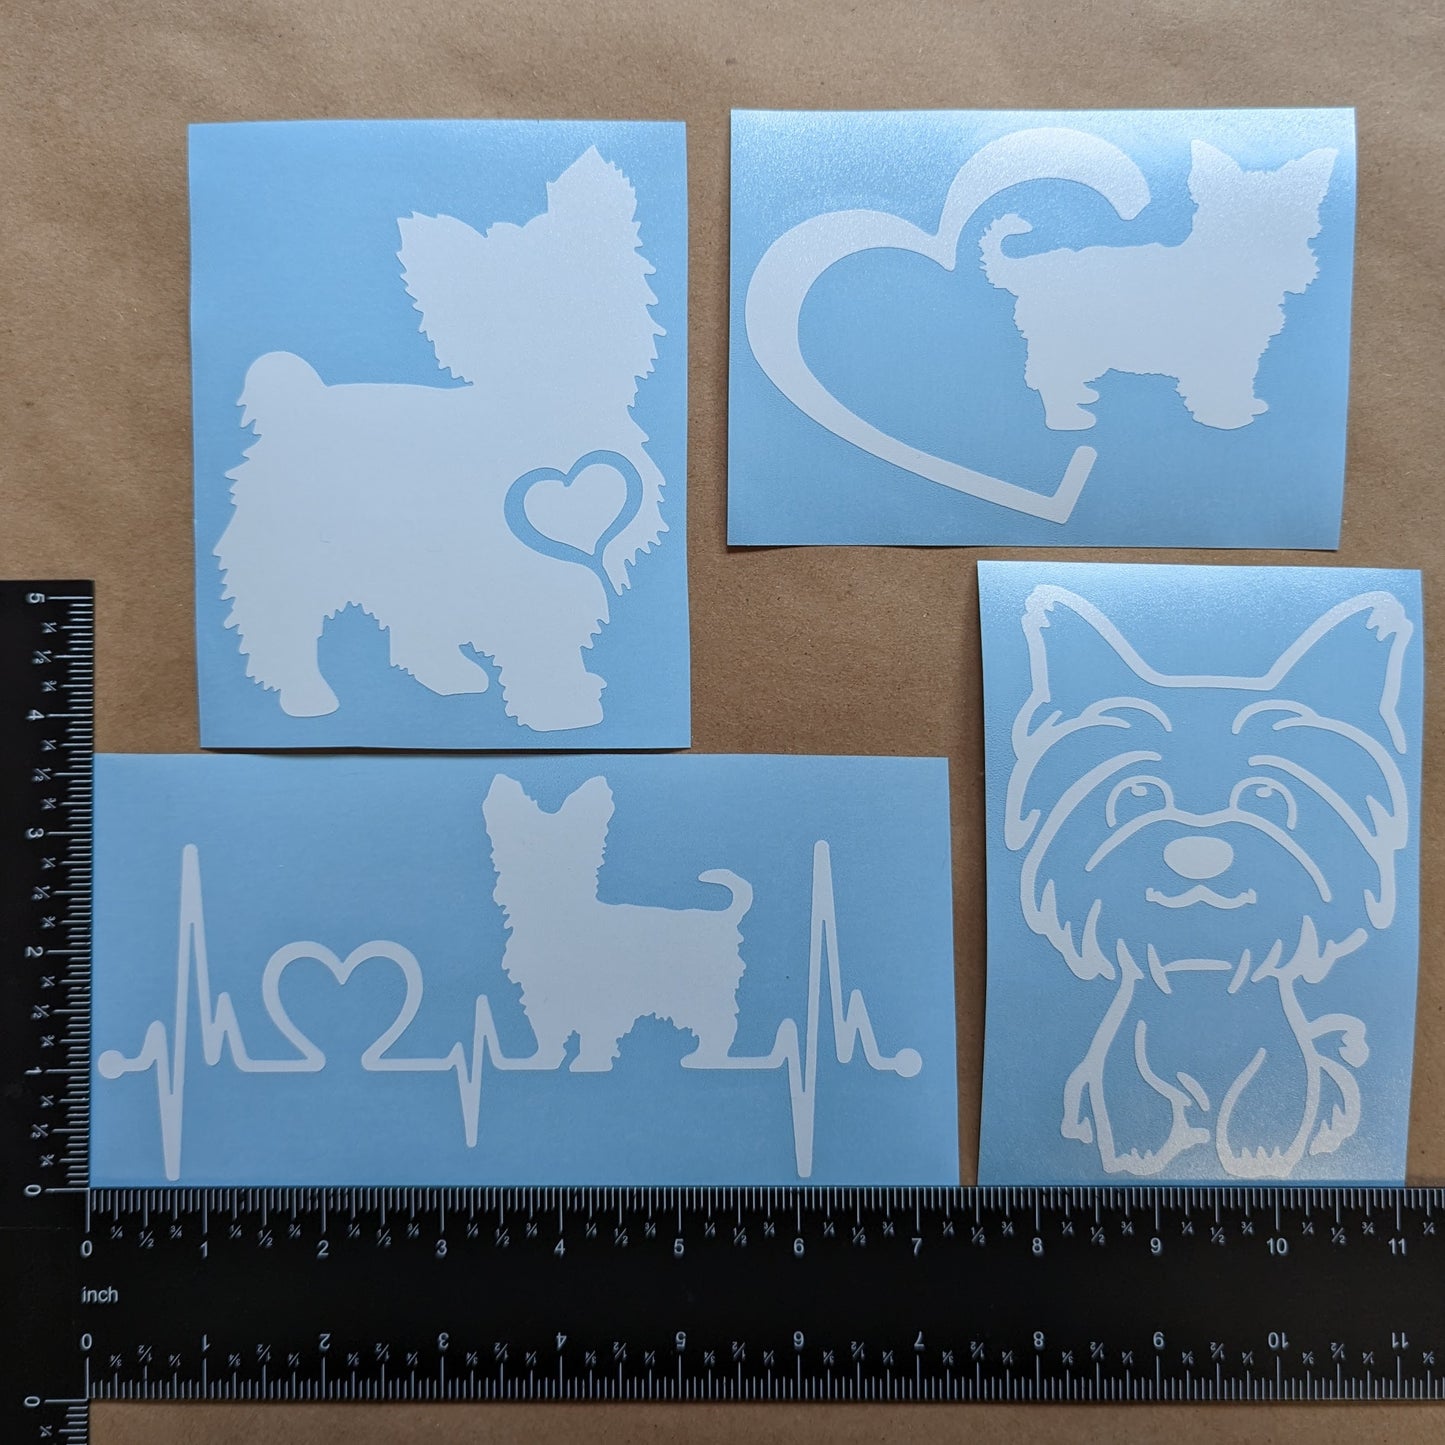 Yorkshire Terrier Decal 4 Pack